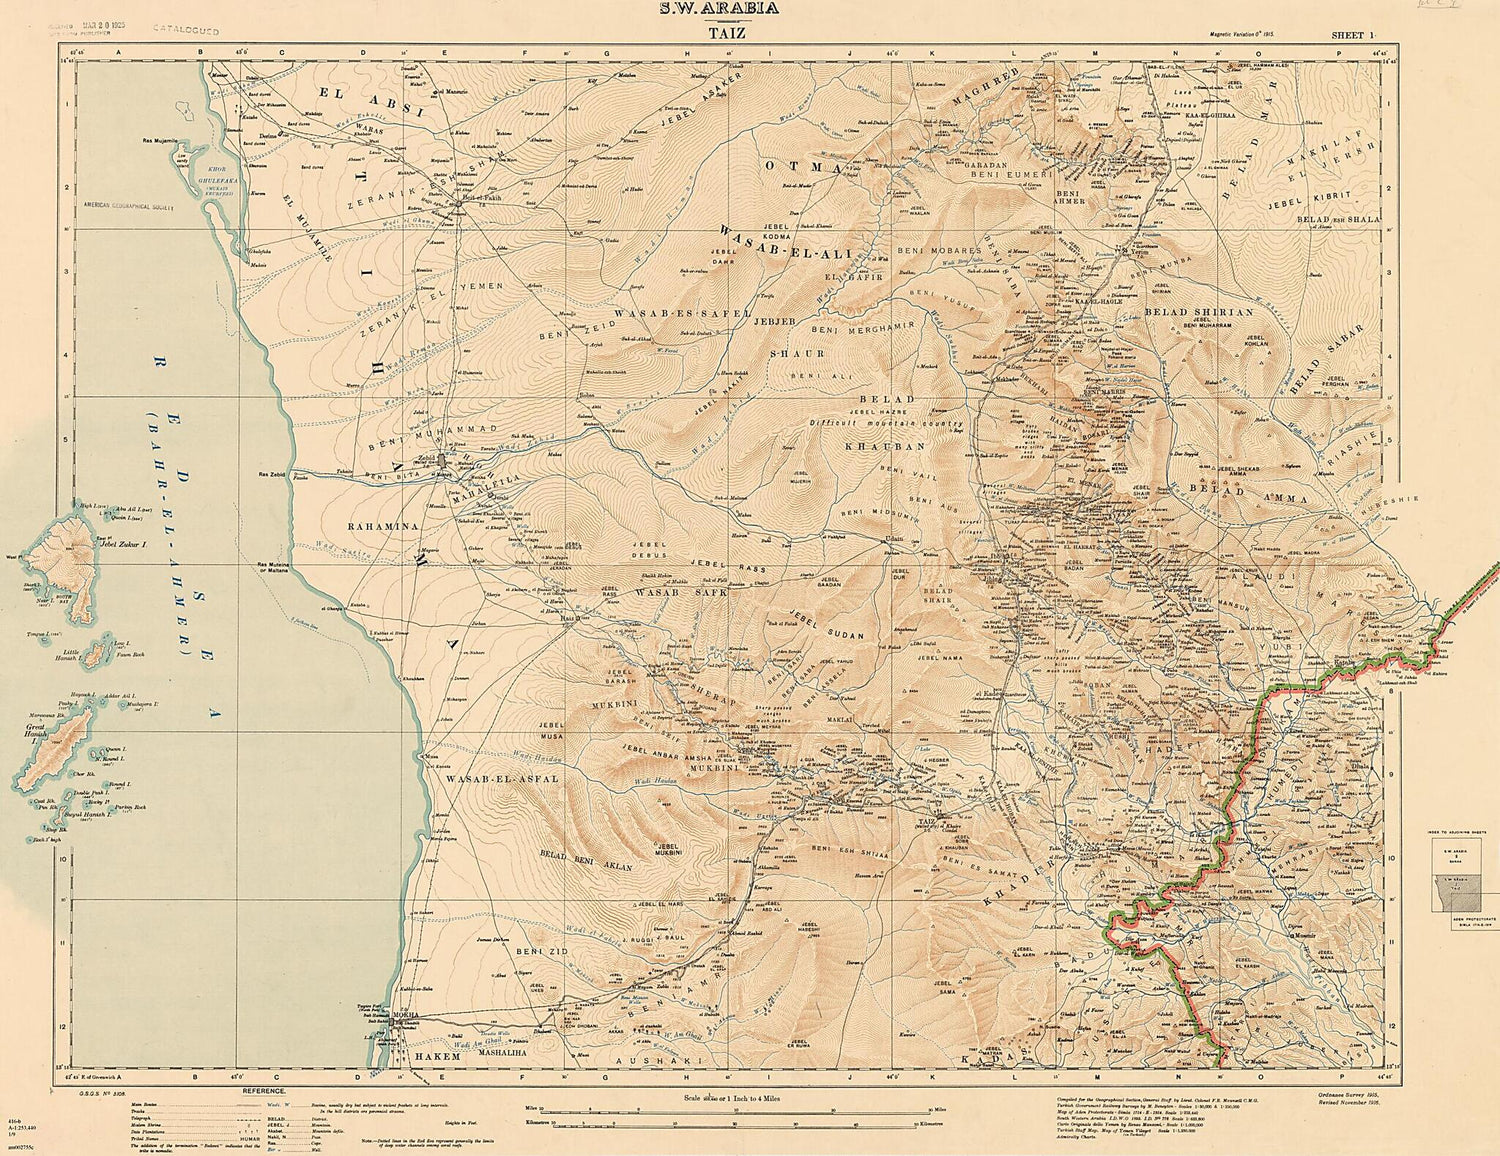 This old map of Southwest Arabia: Taiz, Sheet 1. (S.W. Arabia: Taiz, Sheet 1) from 1916 was created by  Great Britain. War Office. General Staff. Geographical Section, Francis Richard Maunsell in 1916